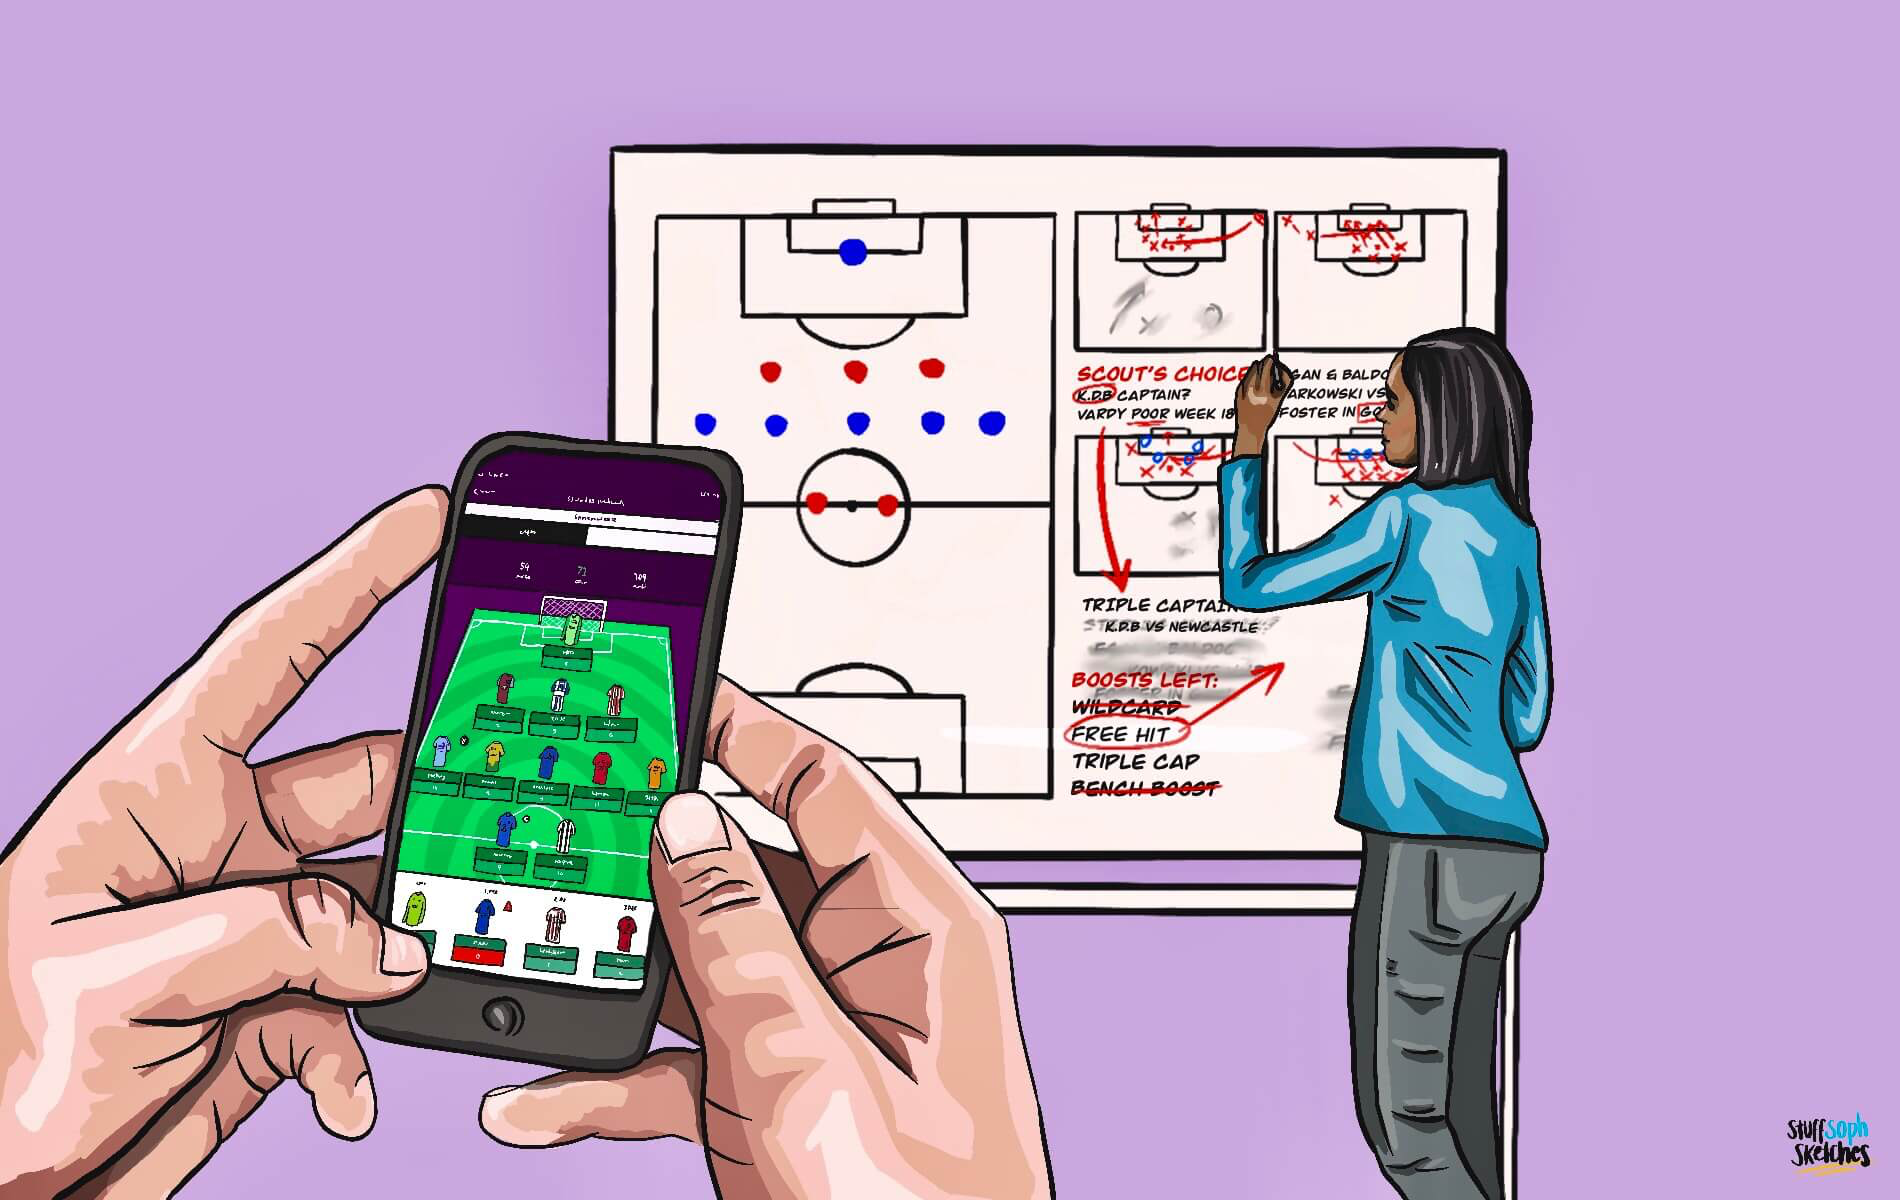 Hand holding phone with premier league fantasy football app open, woman writing on tactics board in background